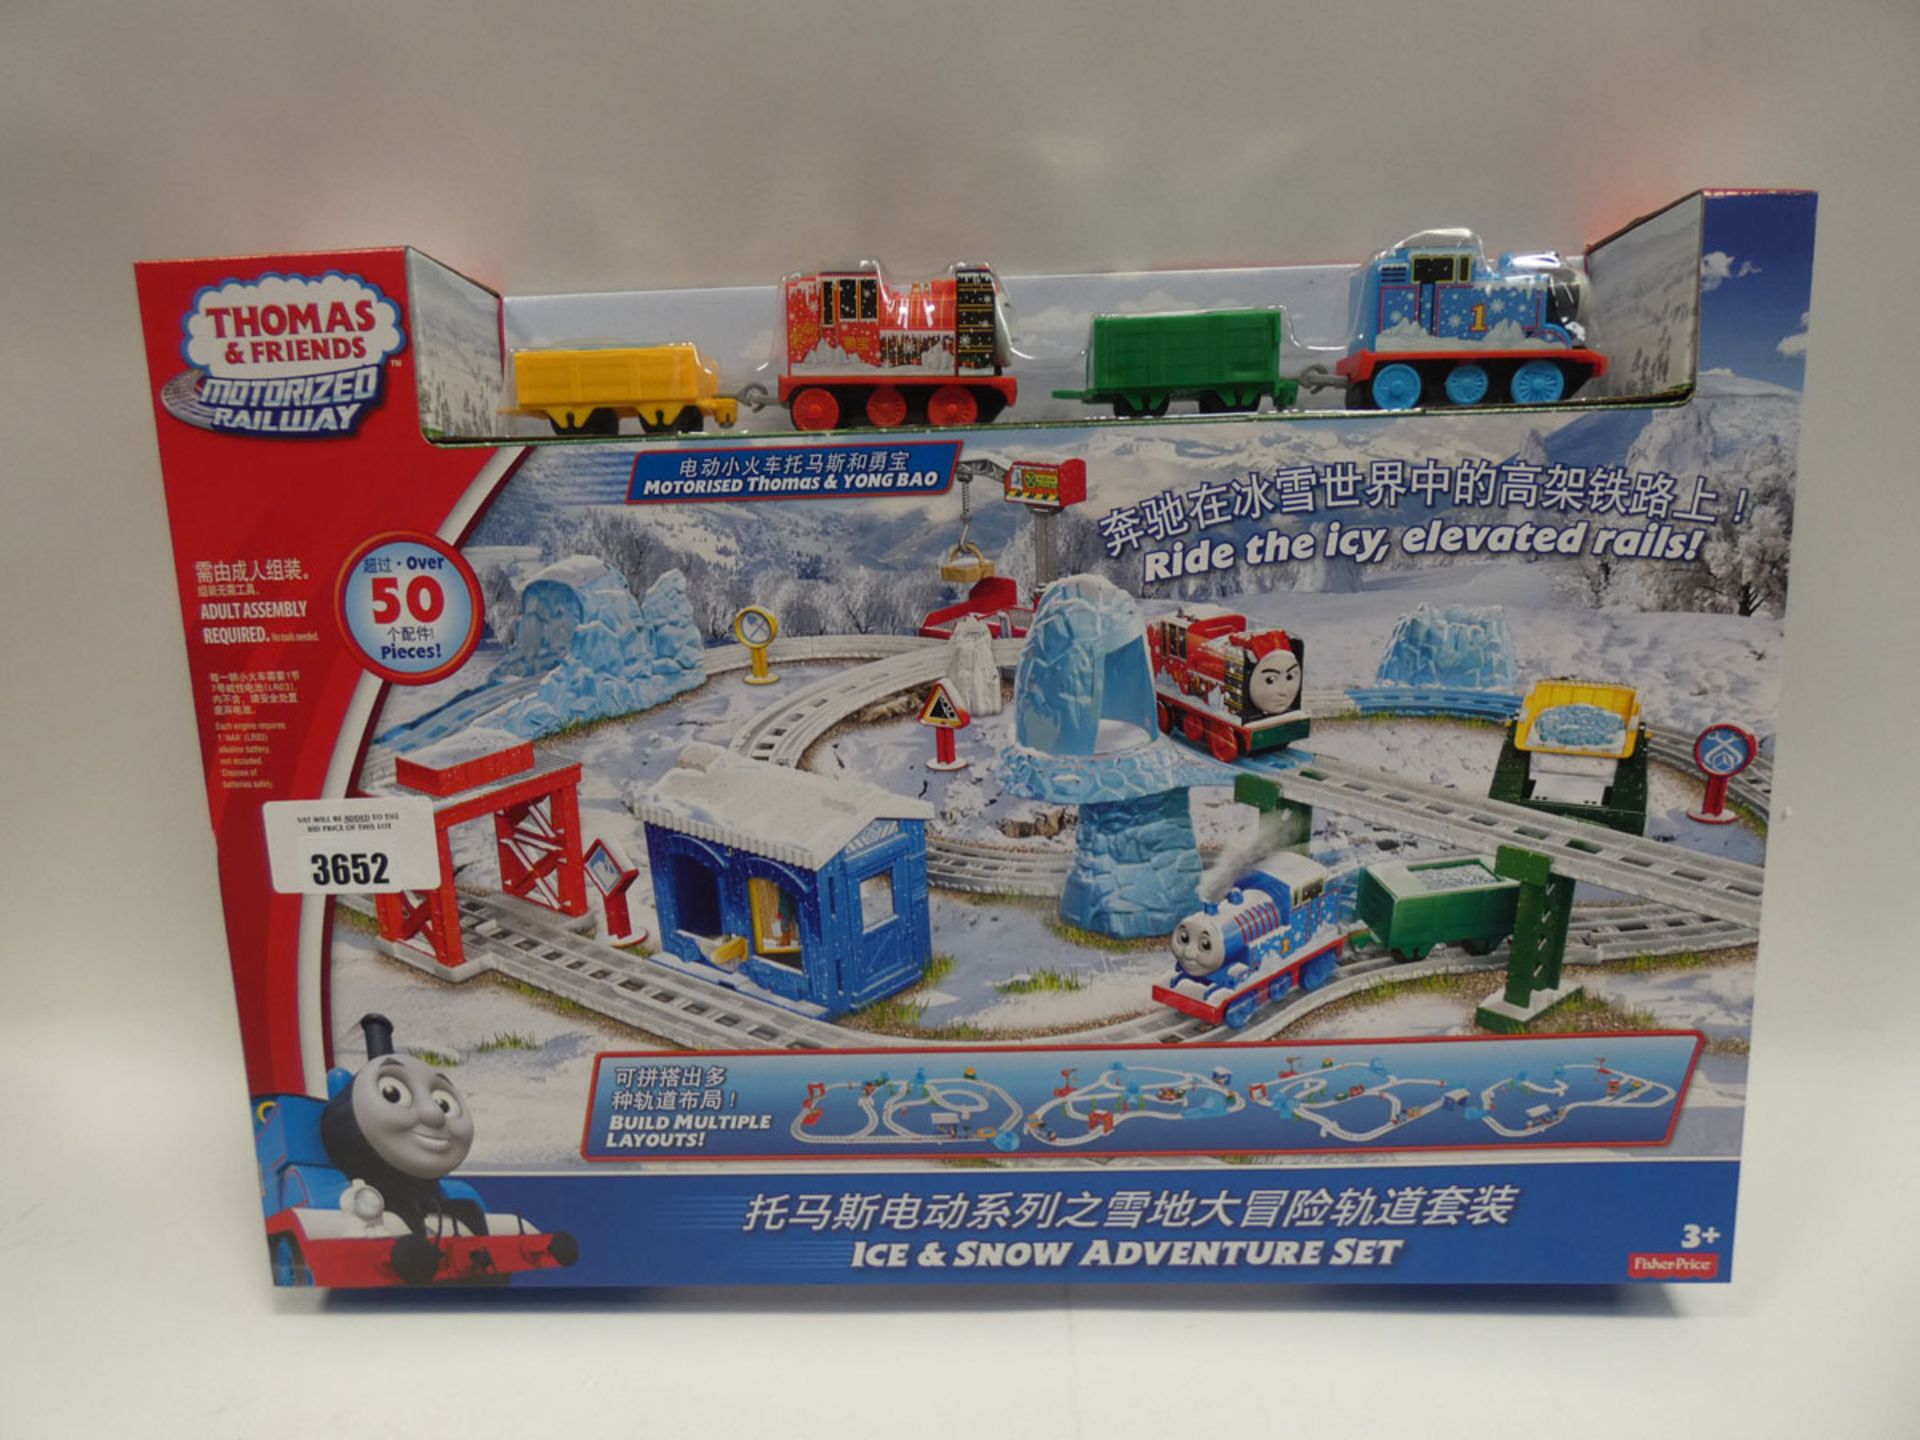 Thomas and Friends Motorized Ice and Snow Adventure Set (including Thomas and Yong Bao trains)